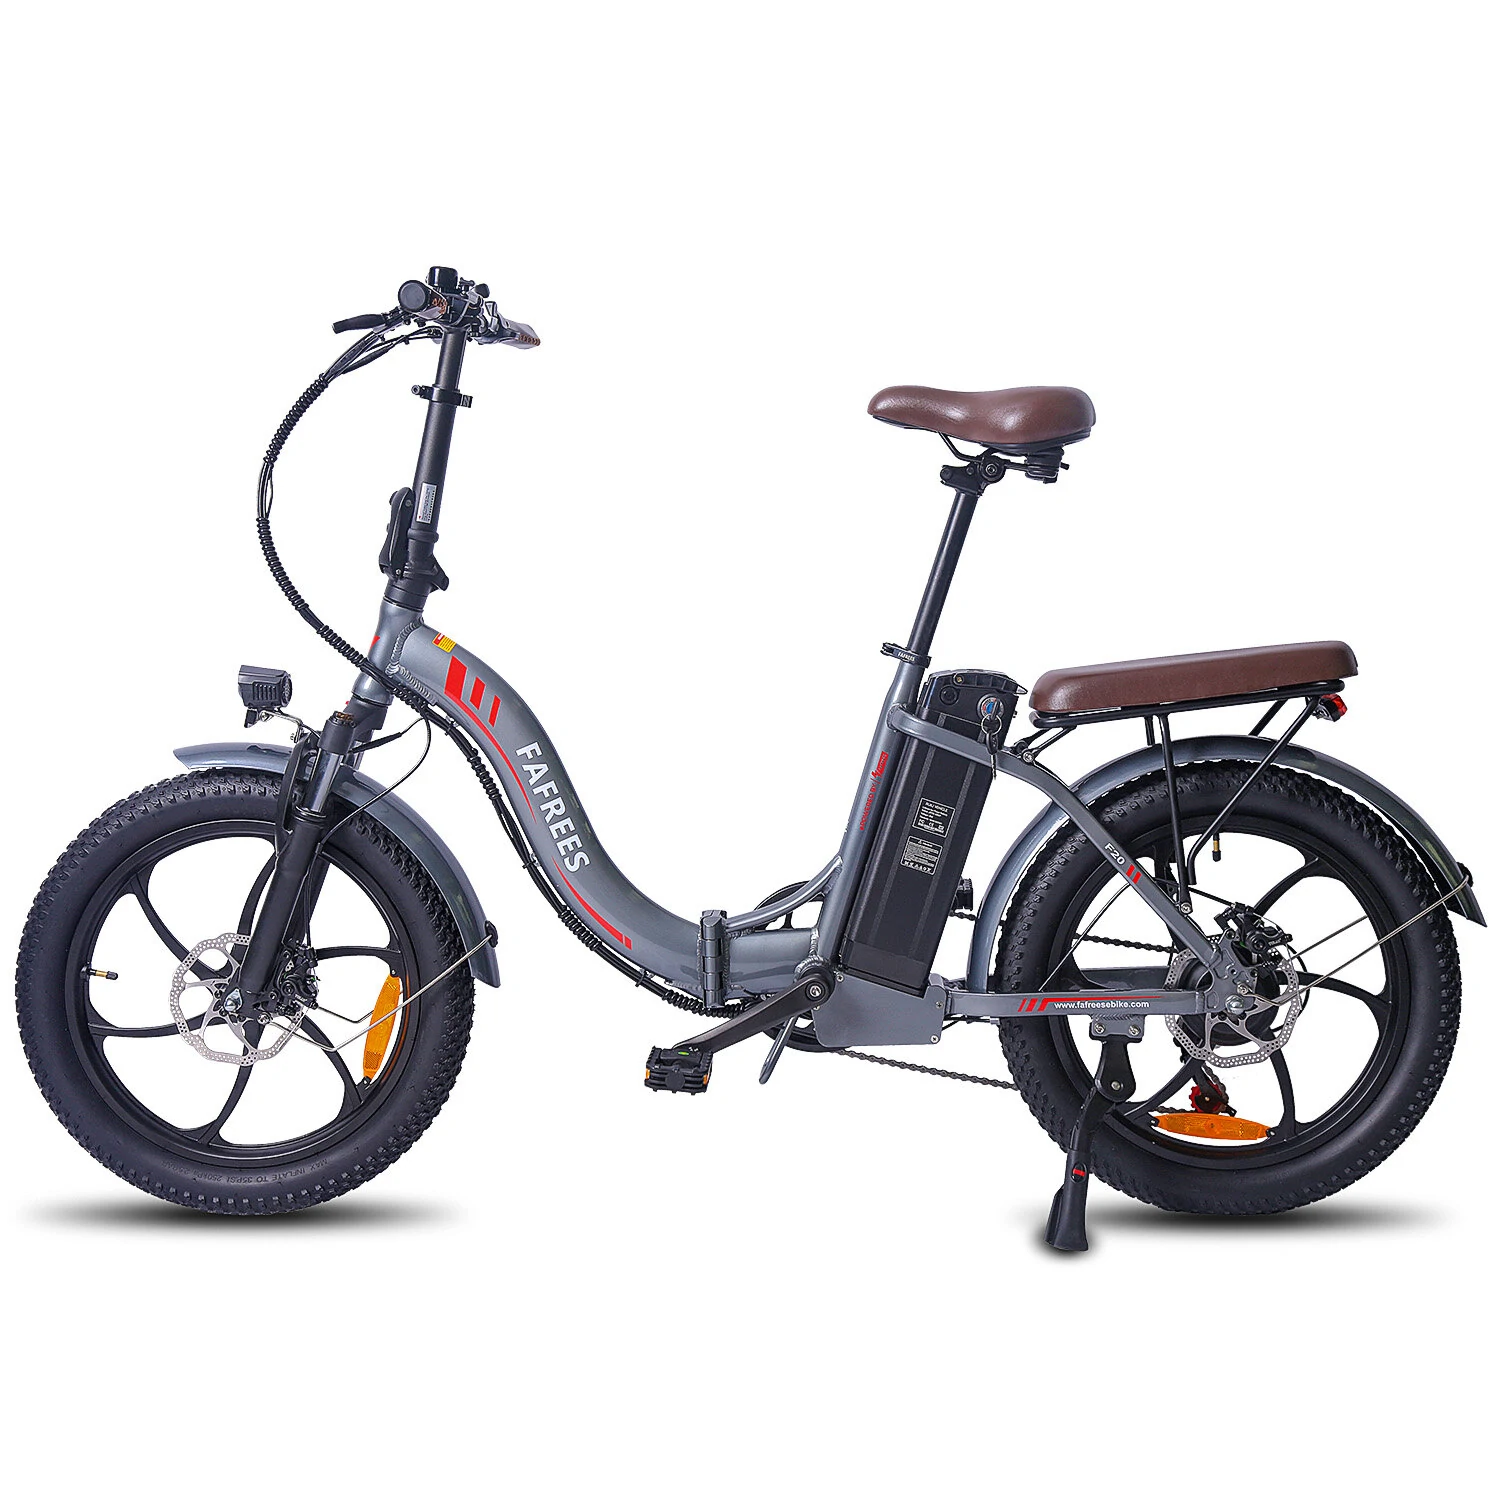 [EU Direct] FAFREES F20 PRO 36V 18AH 250W 20x3.0inch Folding Electric Bicycle 25KM/H Top Speed 120-150KM Max Mileage 150KG Payload Electric Bike - Blue